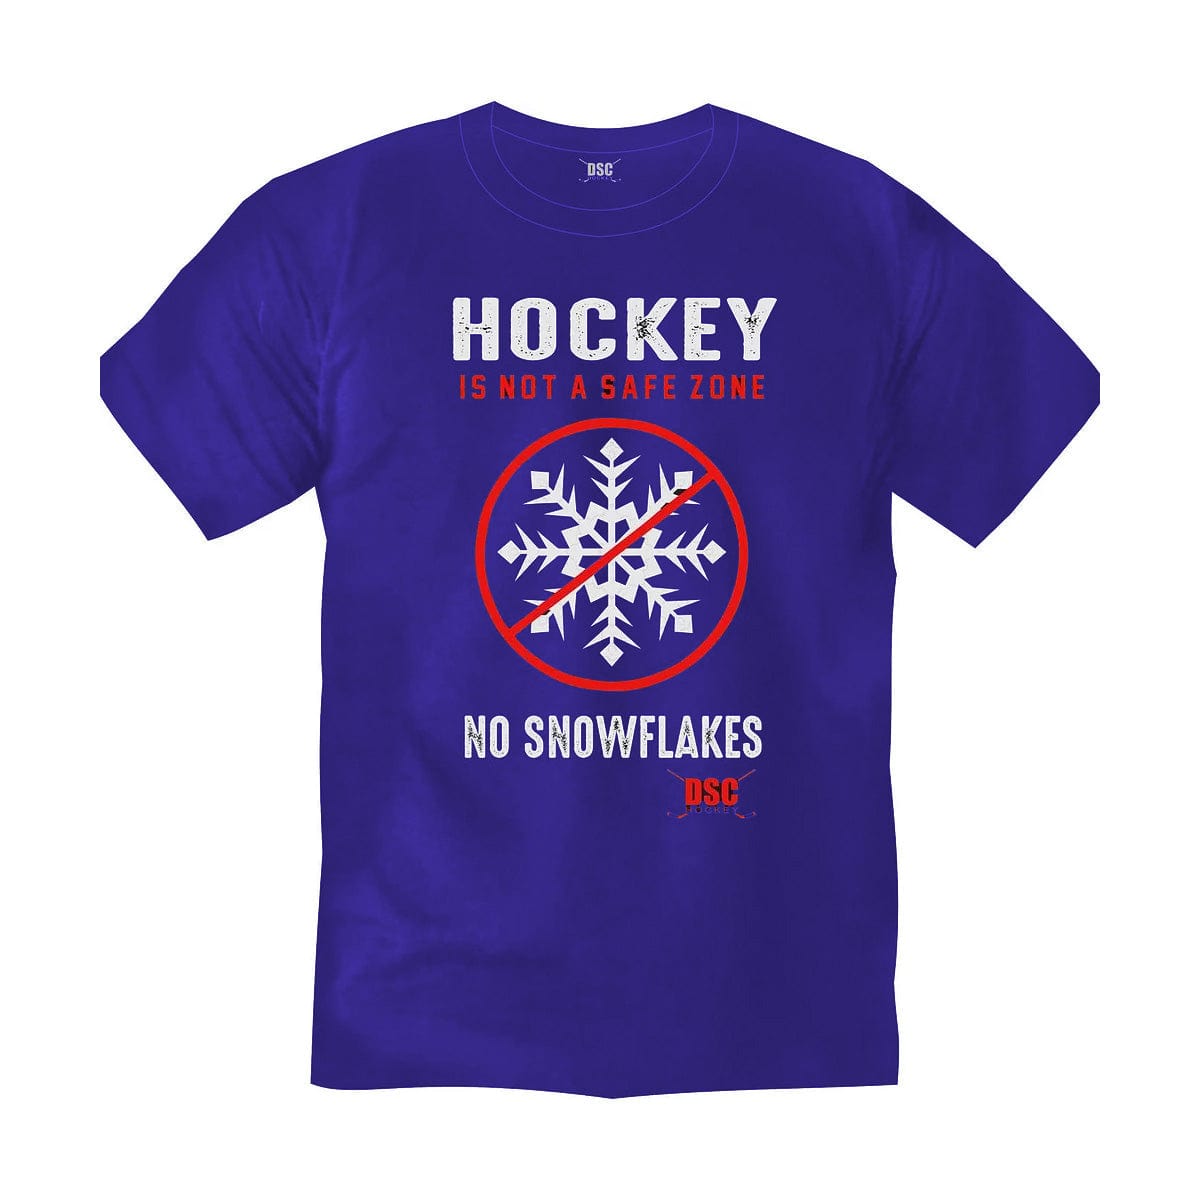 DSC Hockey No Snowflakes Youth Shirt - The Hockey Shop Source For Sports